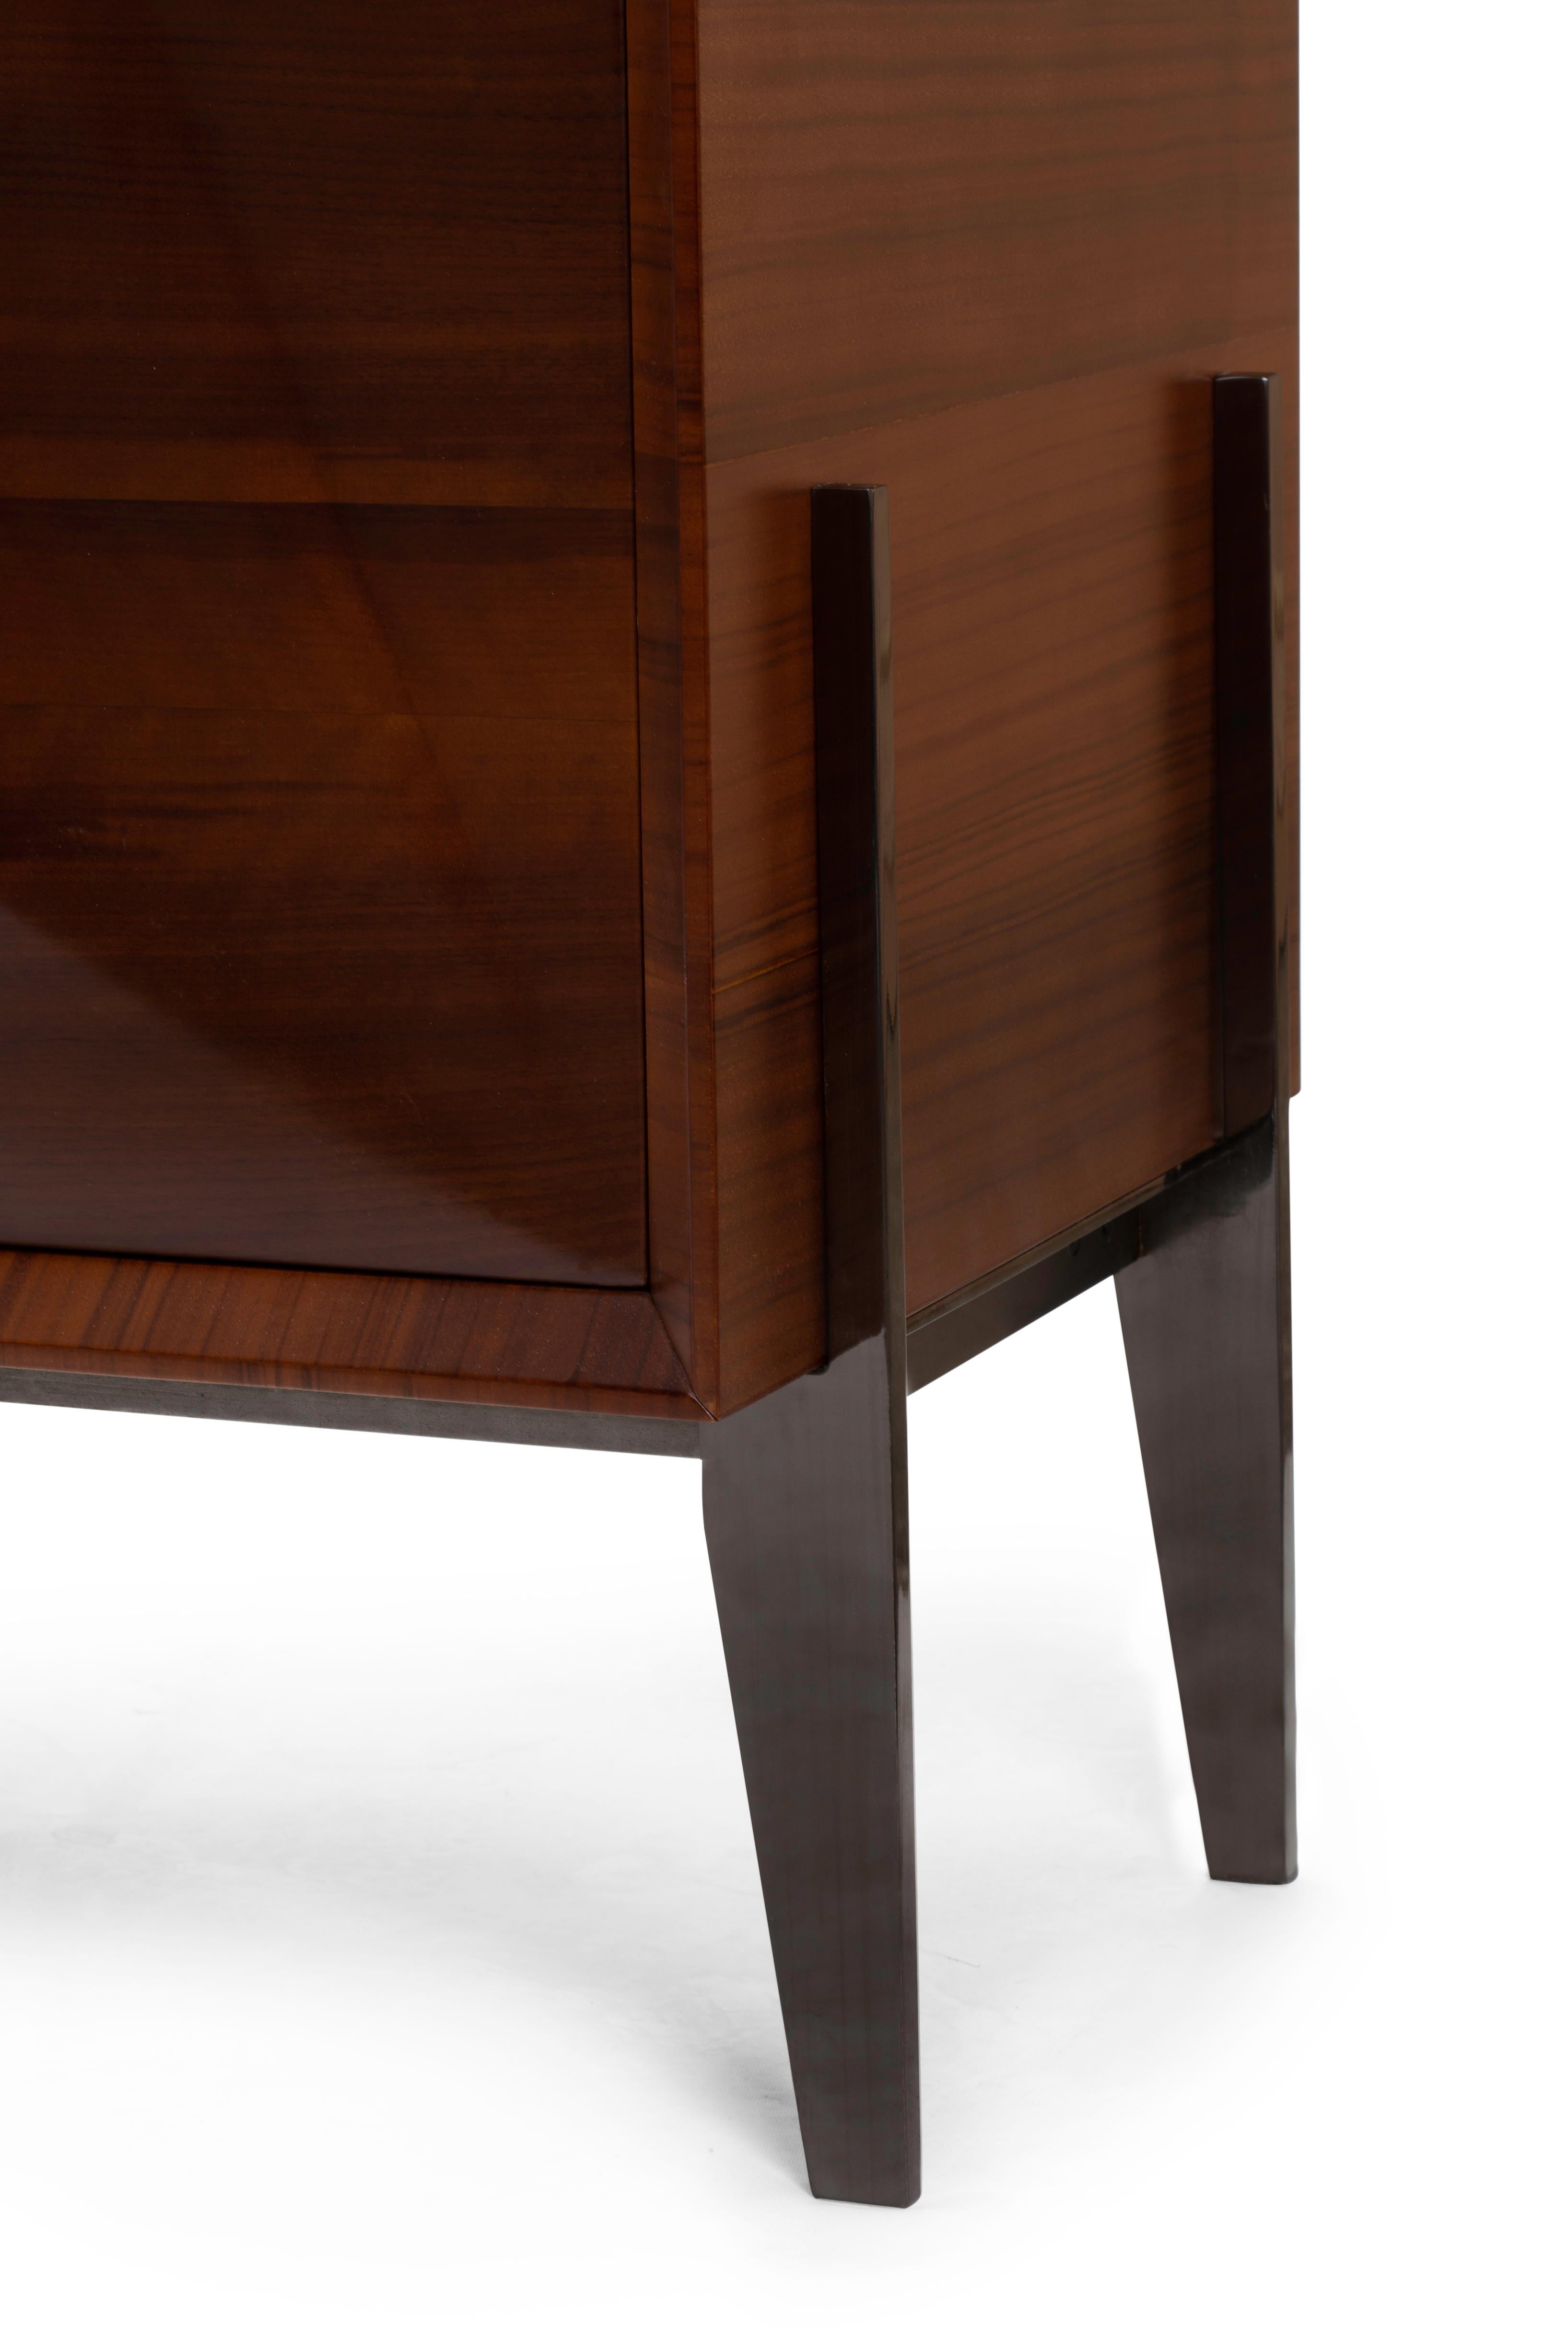 Carved 21st Century Ca Nova Sideboard, Walnut and Porcelain, Made in Italy by Hebanon For Sale